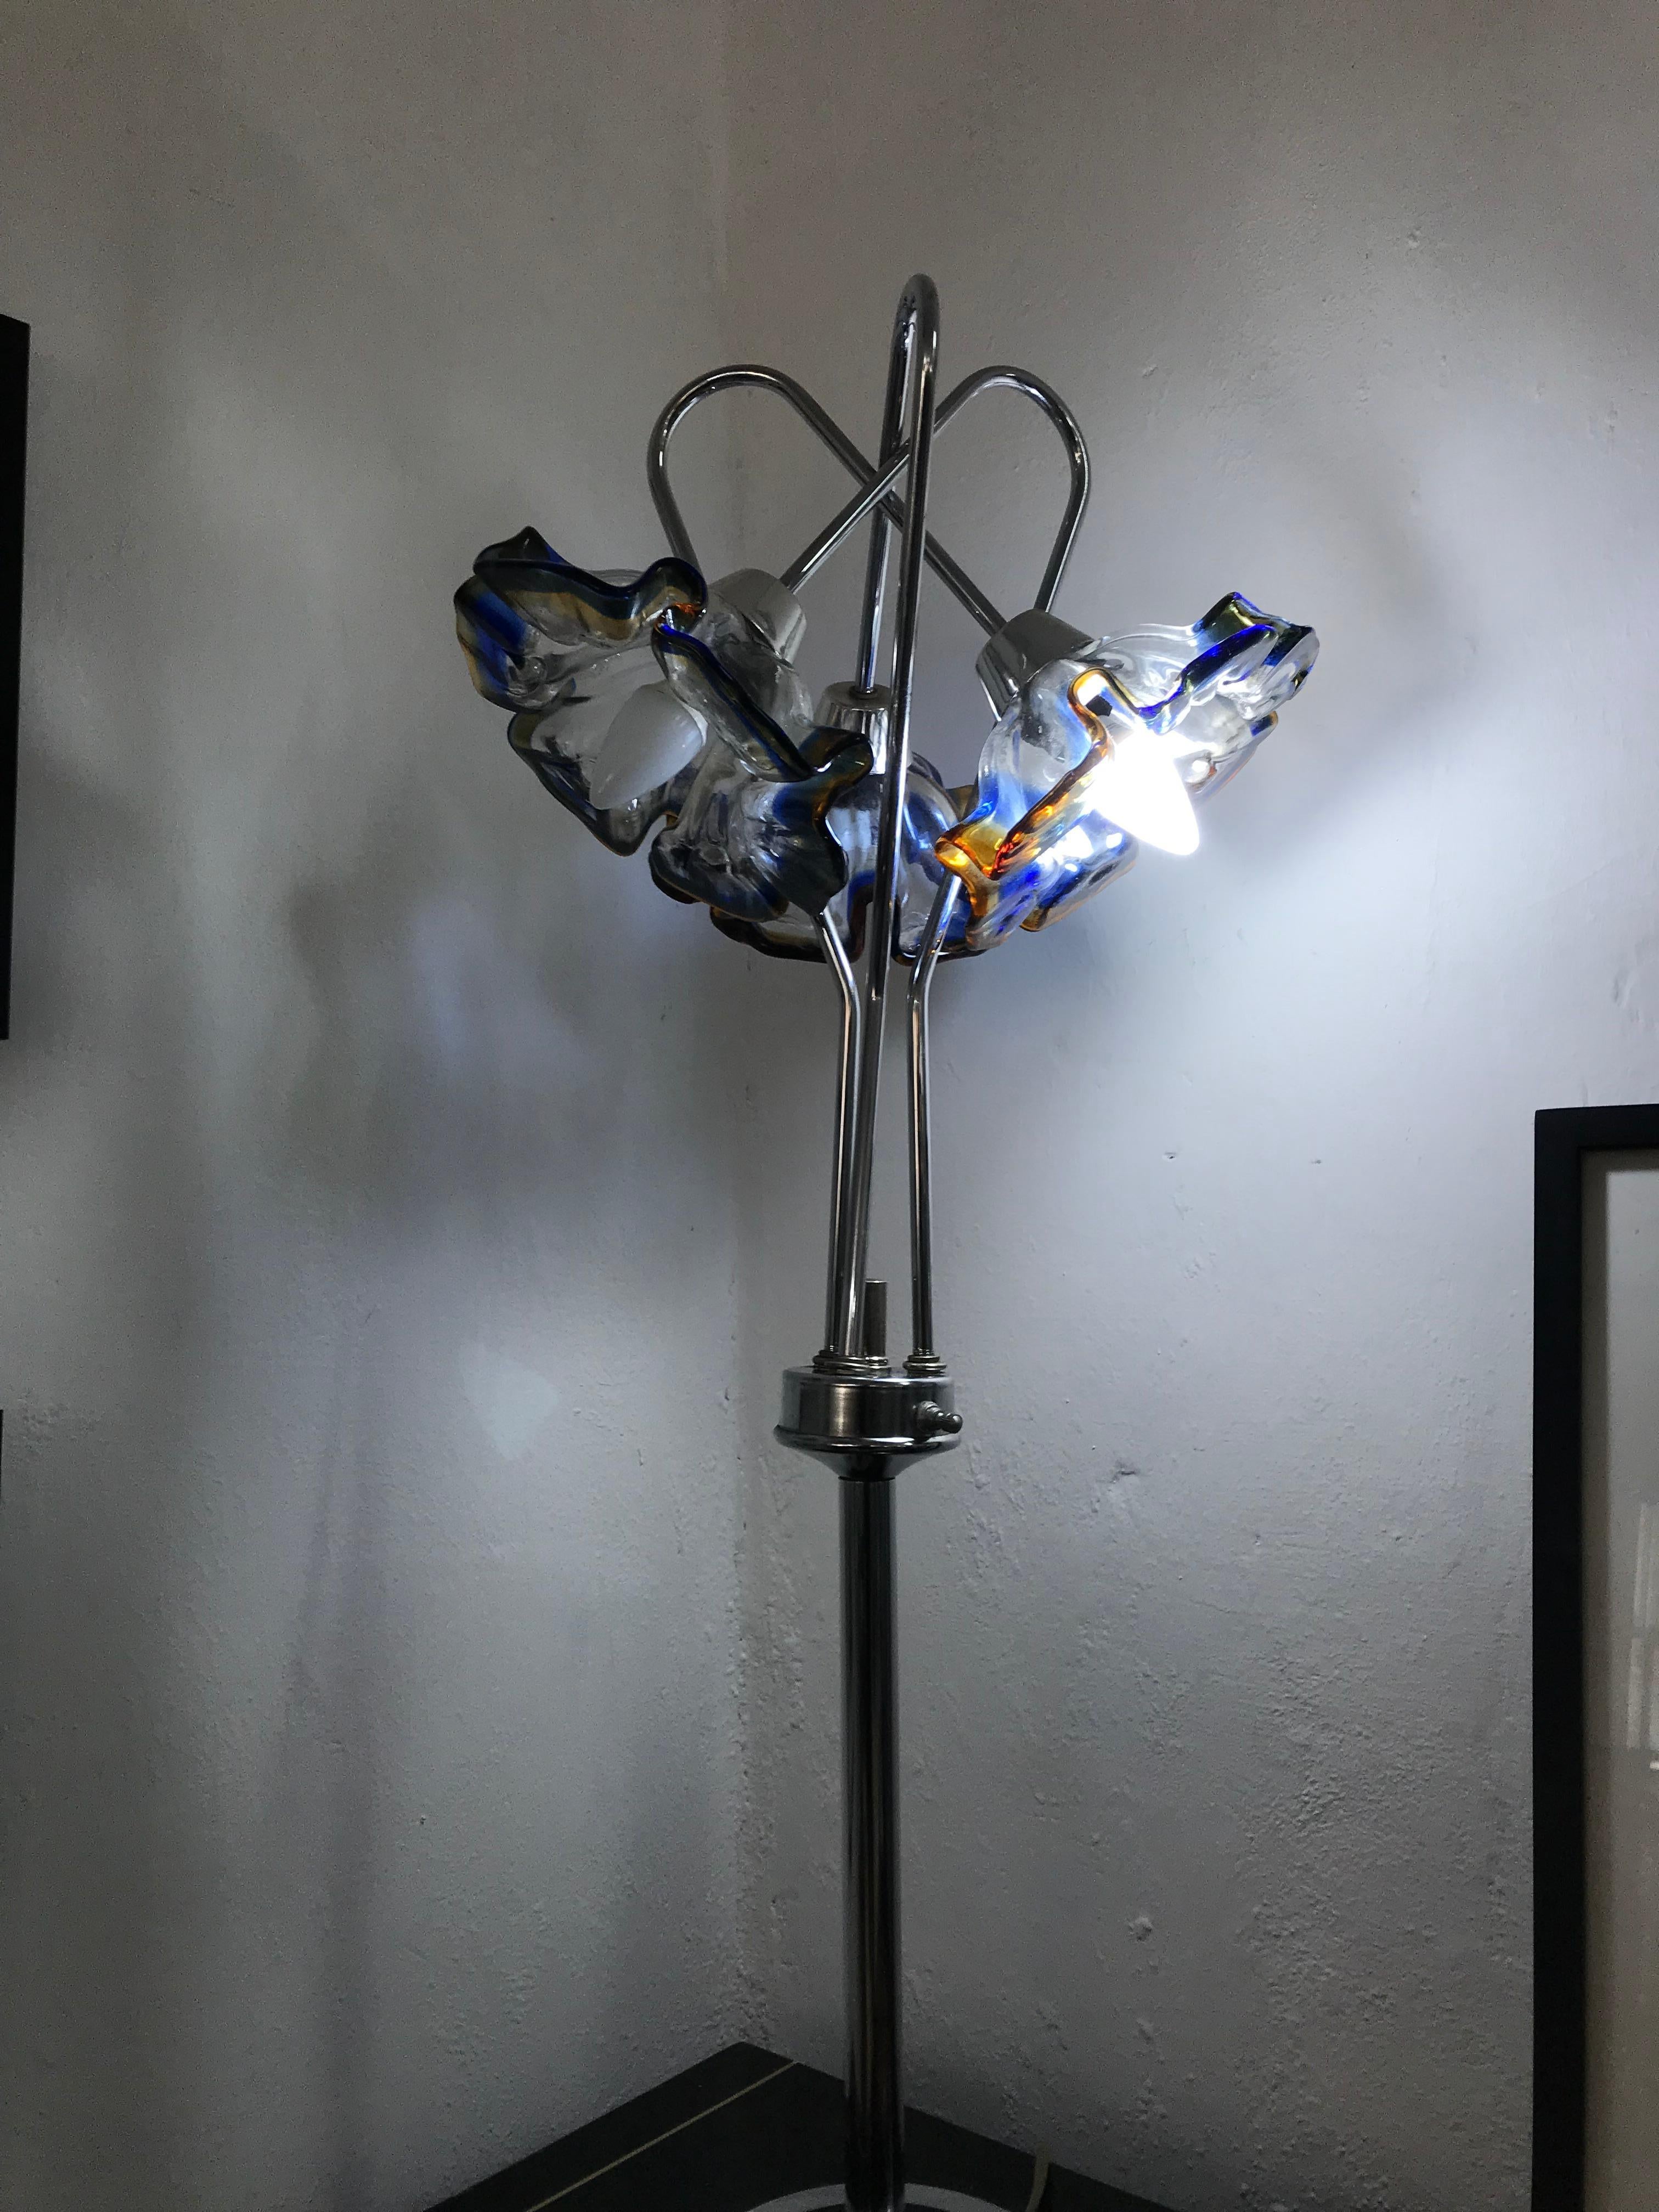 Mid-Century Modern Table Lamp by Mazzega in Murano Glass and Chrome, circa 1970 In Good Condition For Sale In Merida, Yucatan